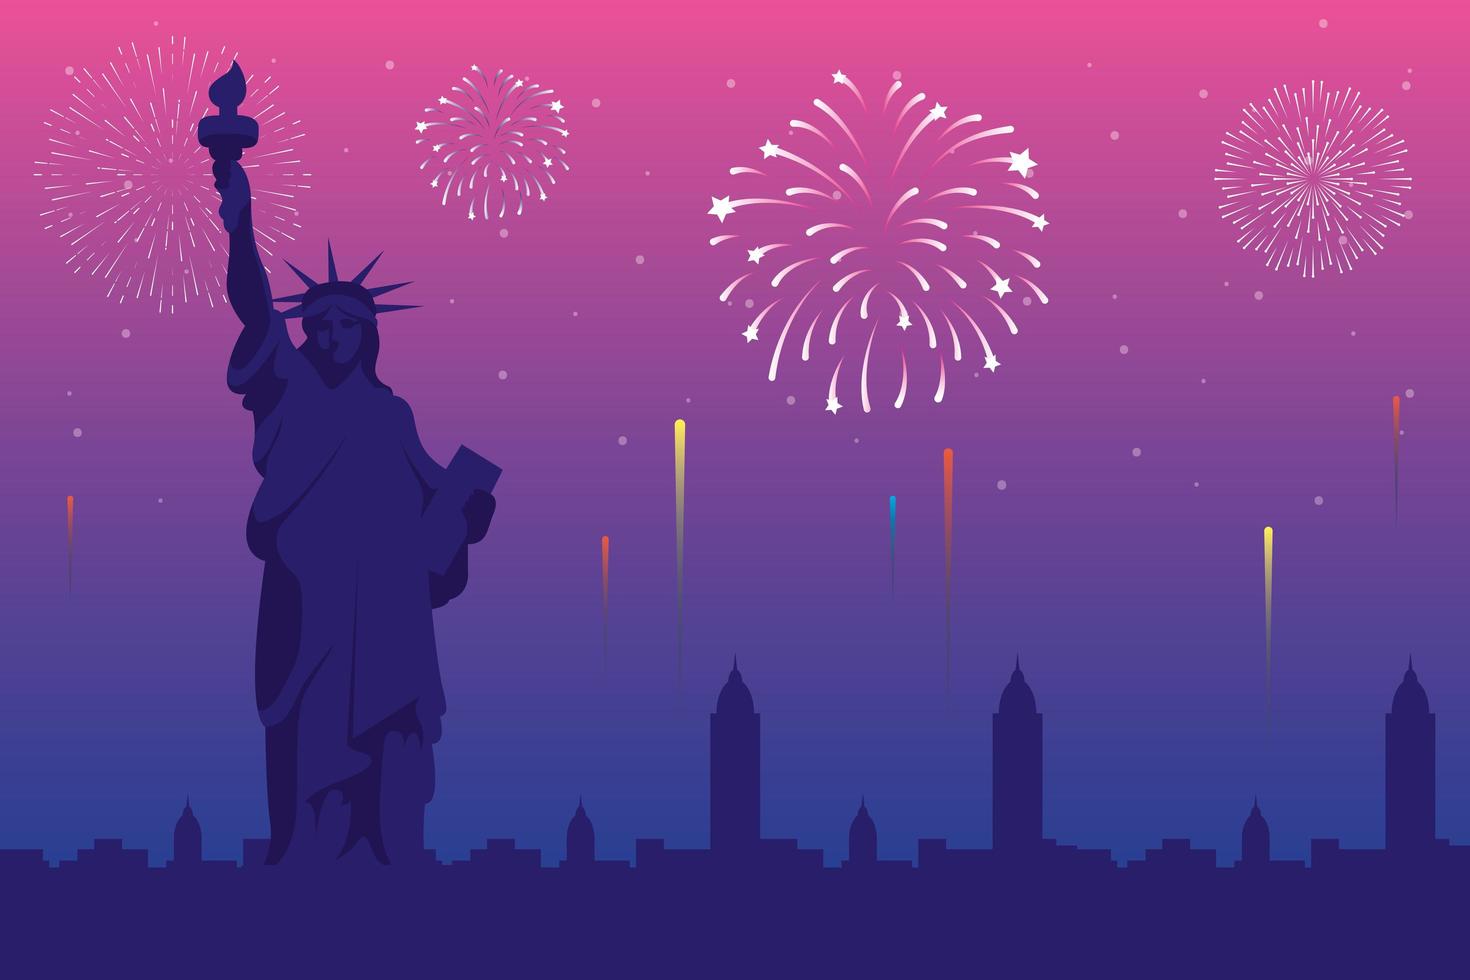 Fireworks burst explosions in NYC background vector